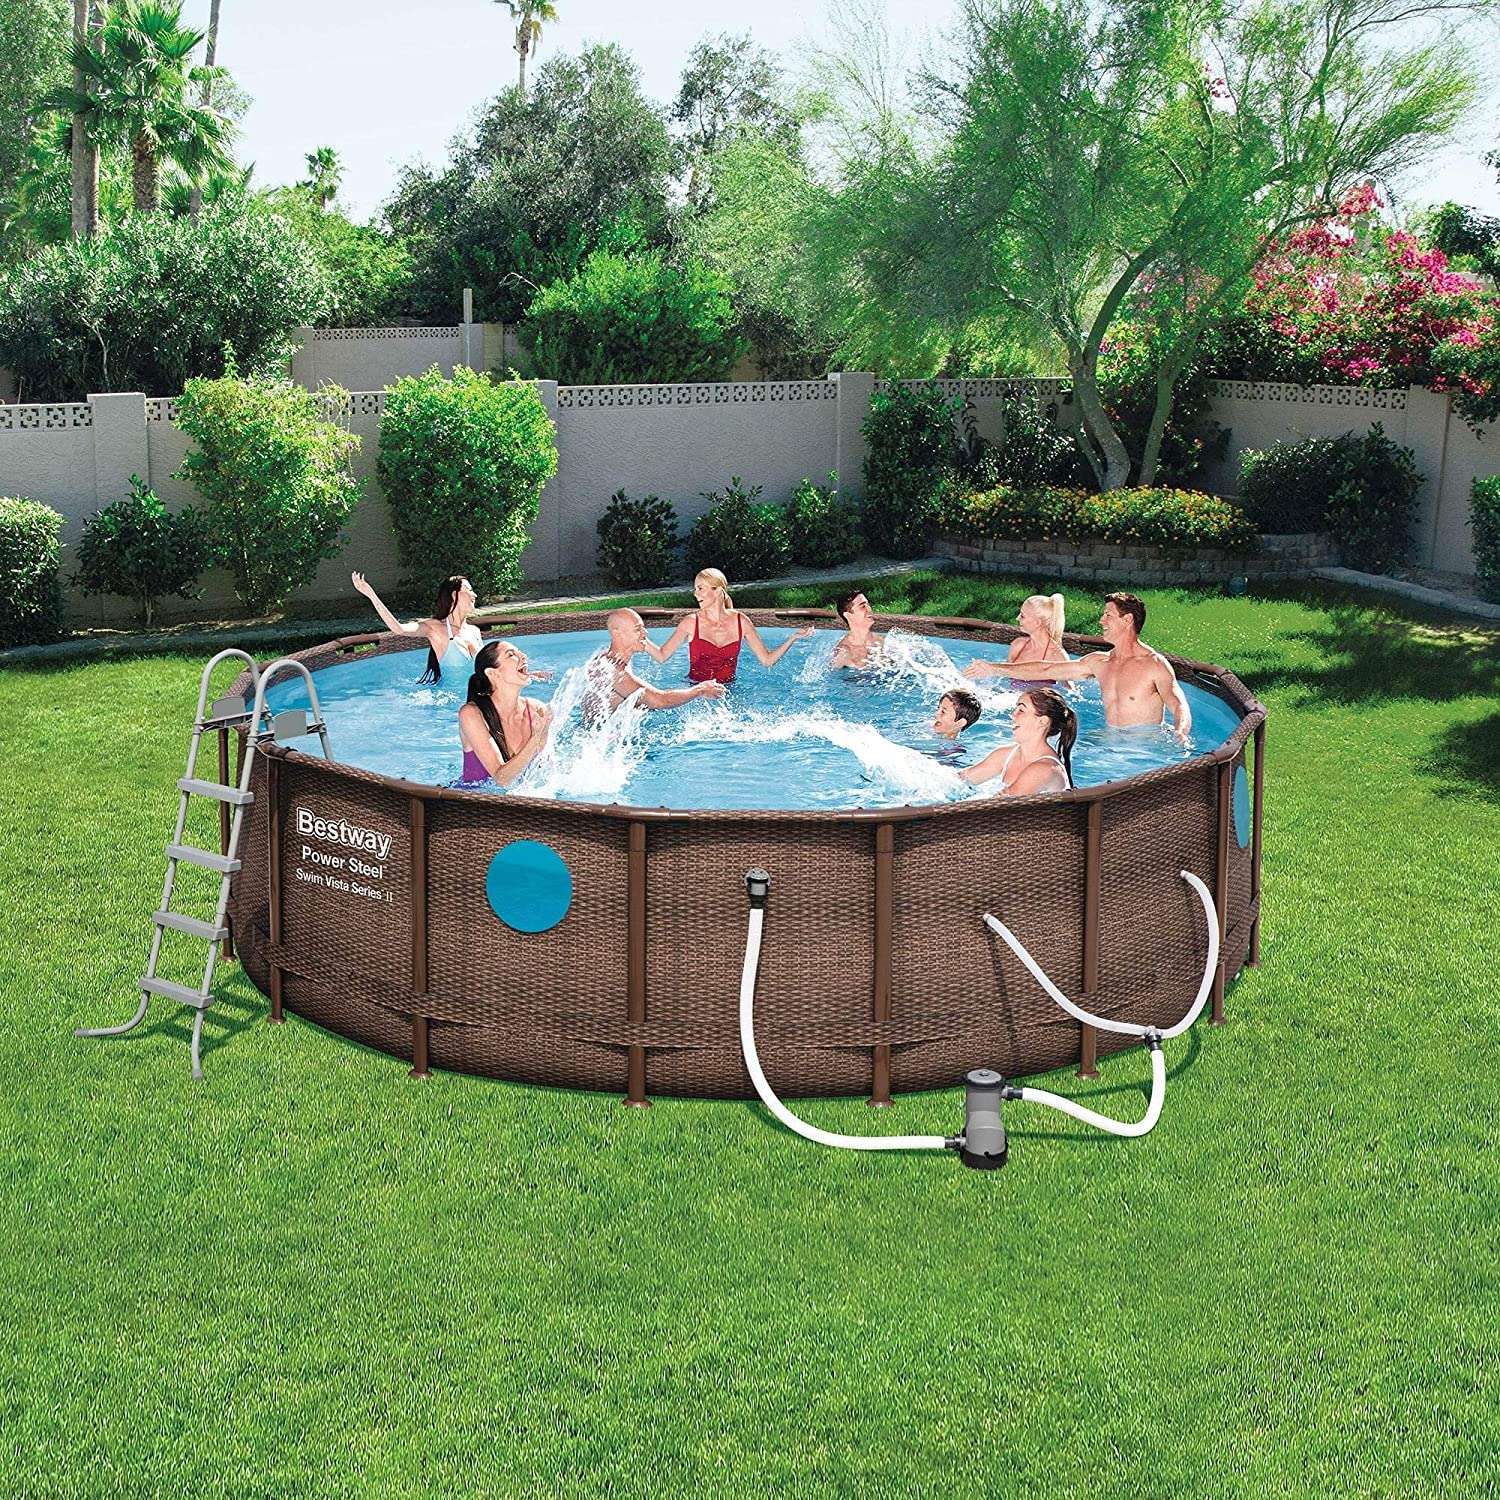 Top 7 Best Oval Above Ground Pool for 2020 Reviews